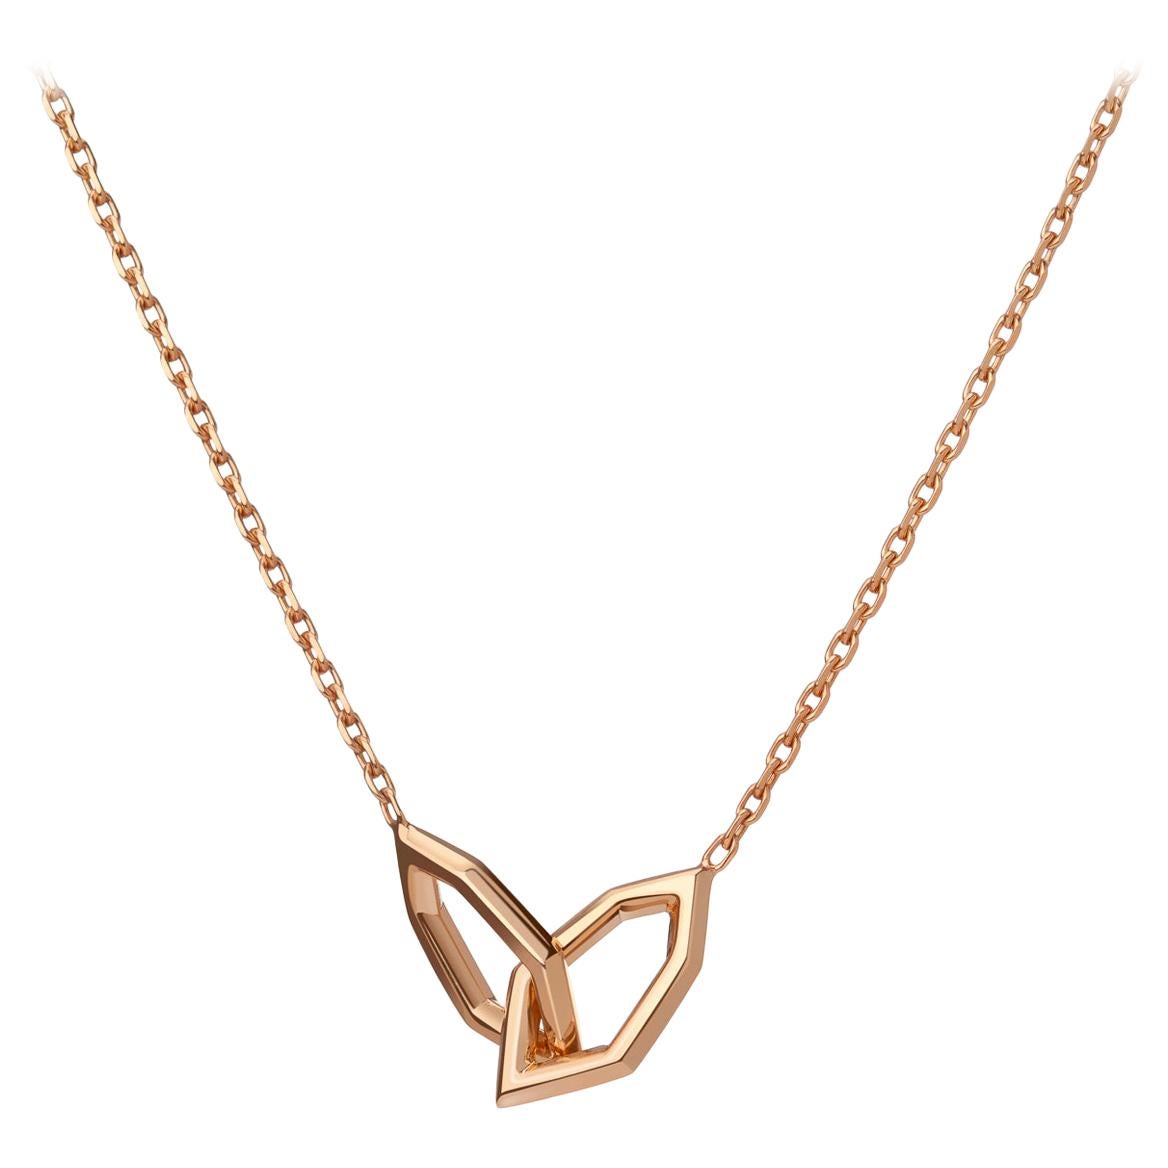 Angie Marei Amanti Chain-Linked Hexagon Pendant Necklace in 18 Karat Gold